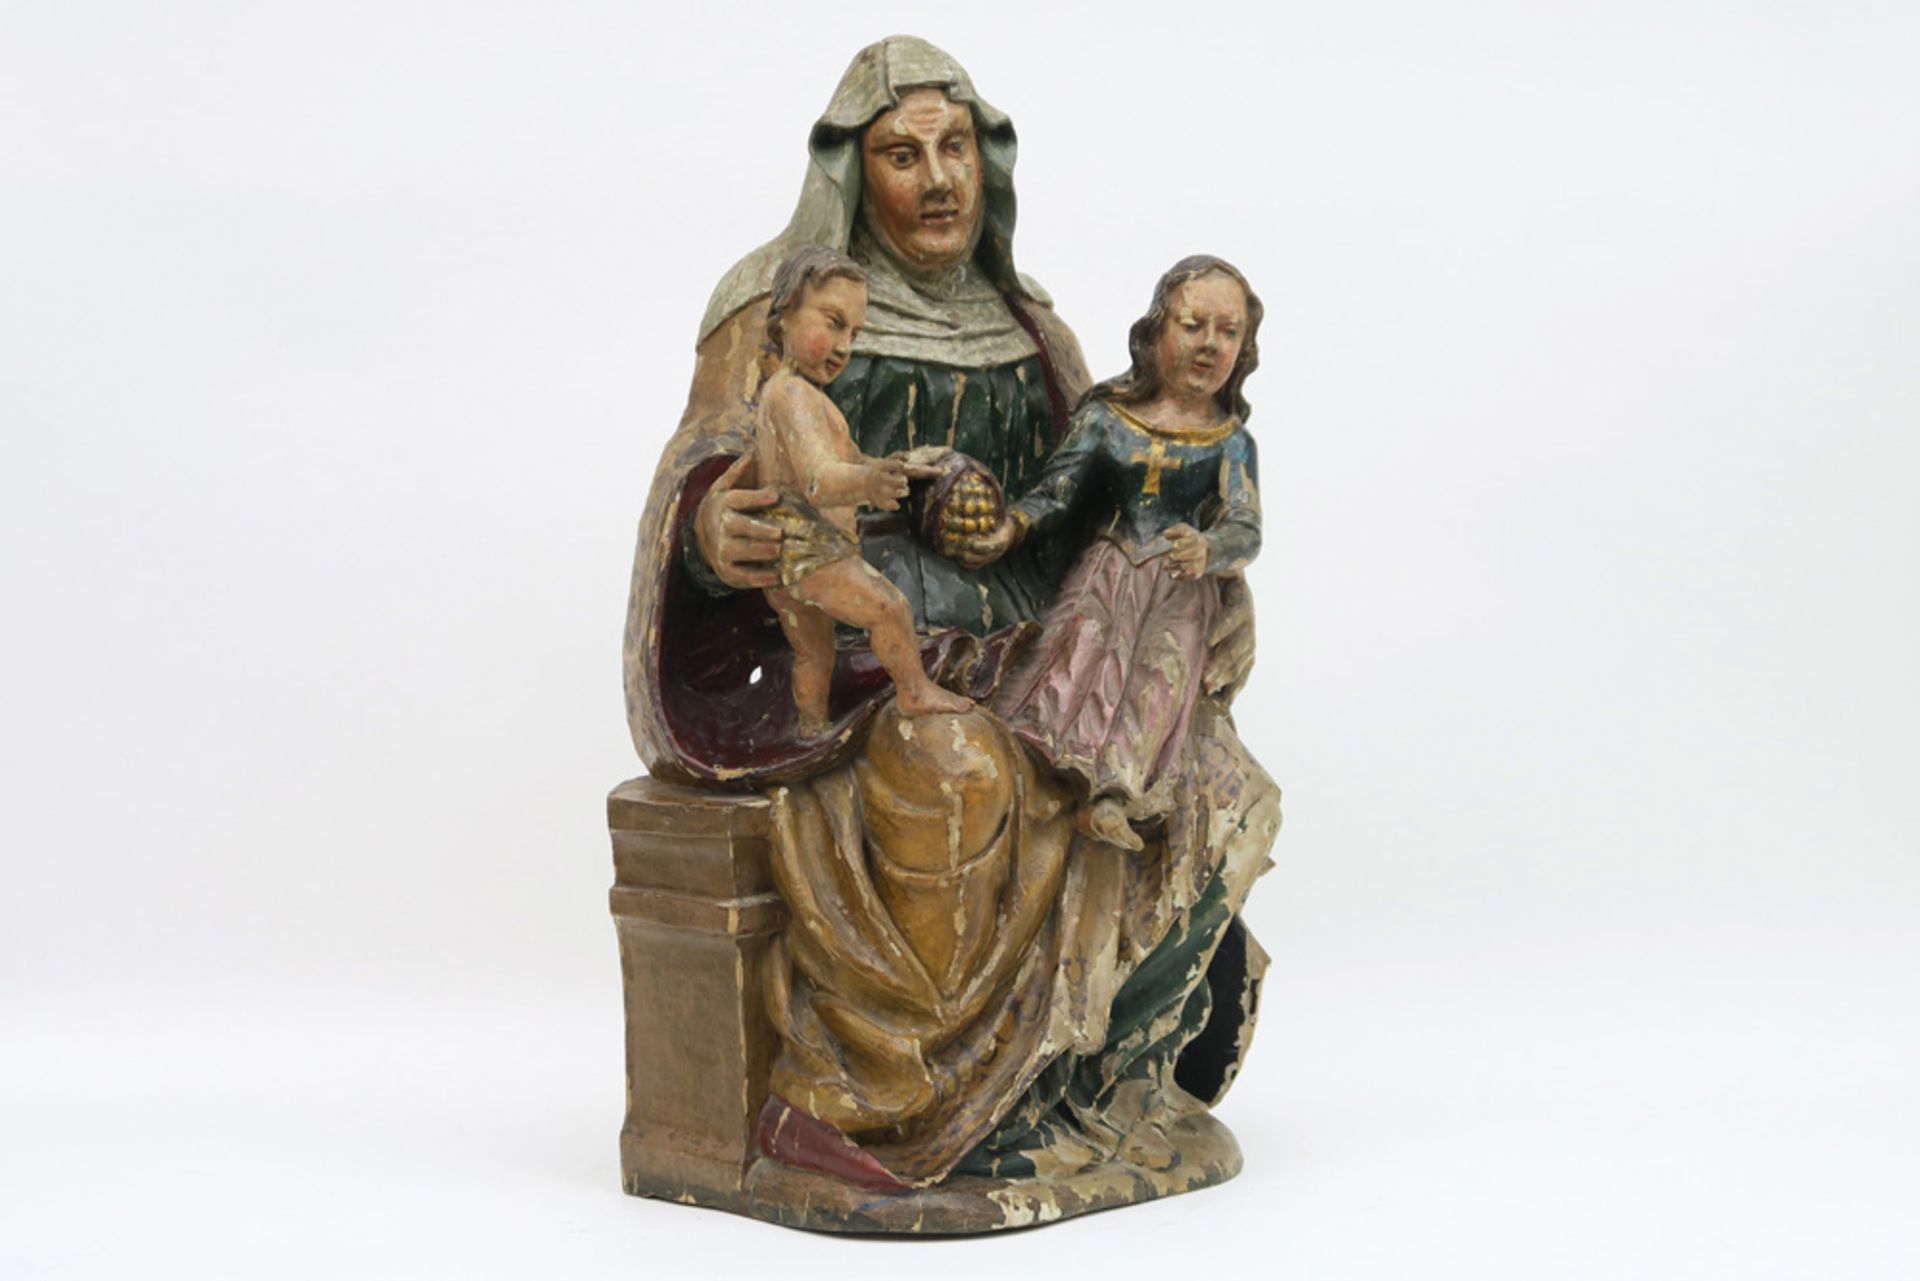 16th Cent. European gothic style "Saint Anna with Mary and child" sculpture in polychromed wood || - Image 2 of 5